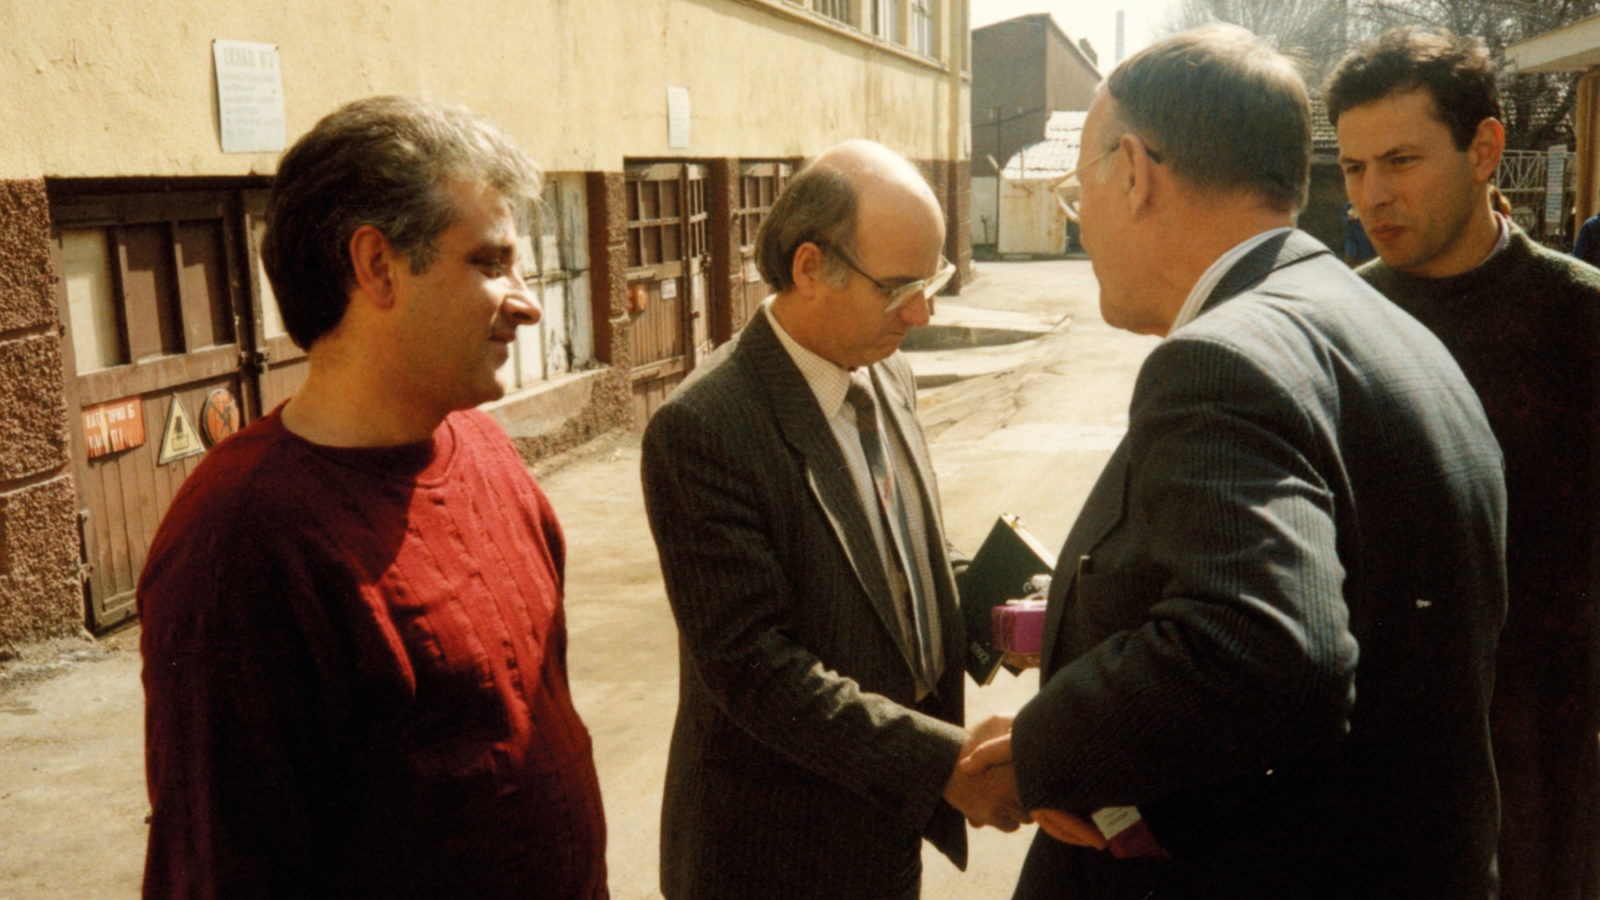 Ingvar Kamprad shakes the hand of a man in a suit, in an industrial area, outdoors. Two men watch the interaction.